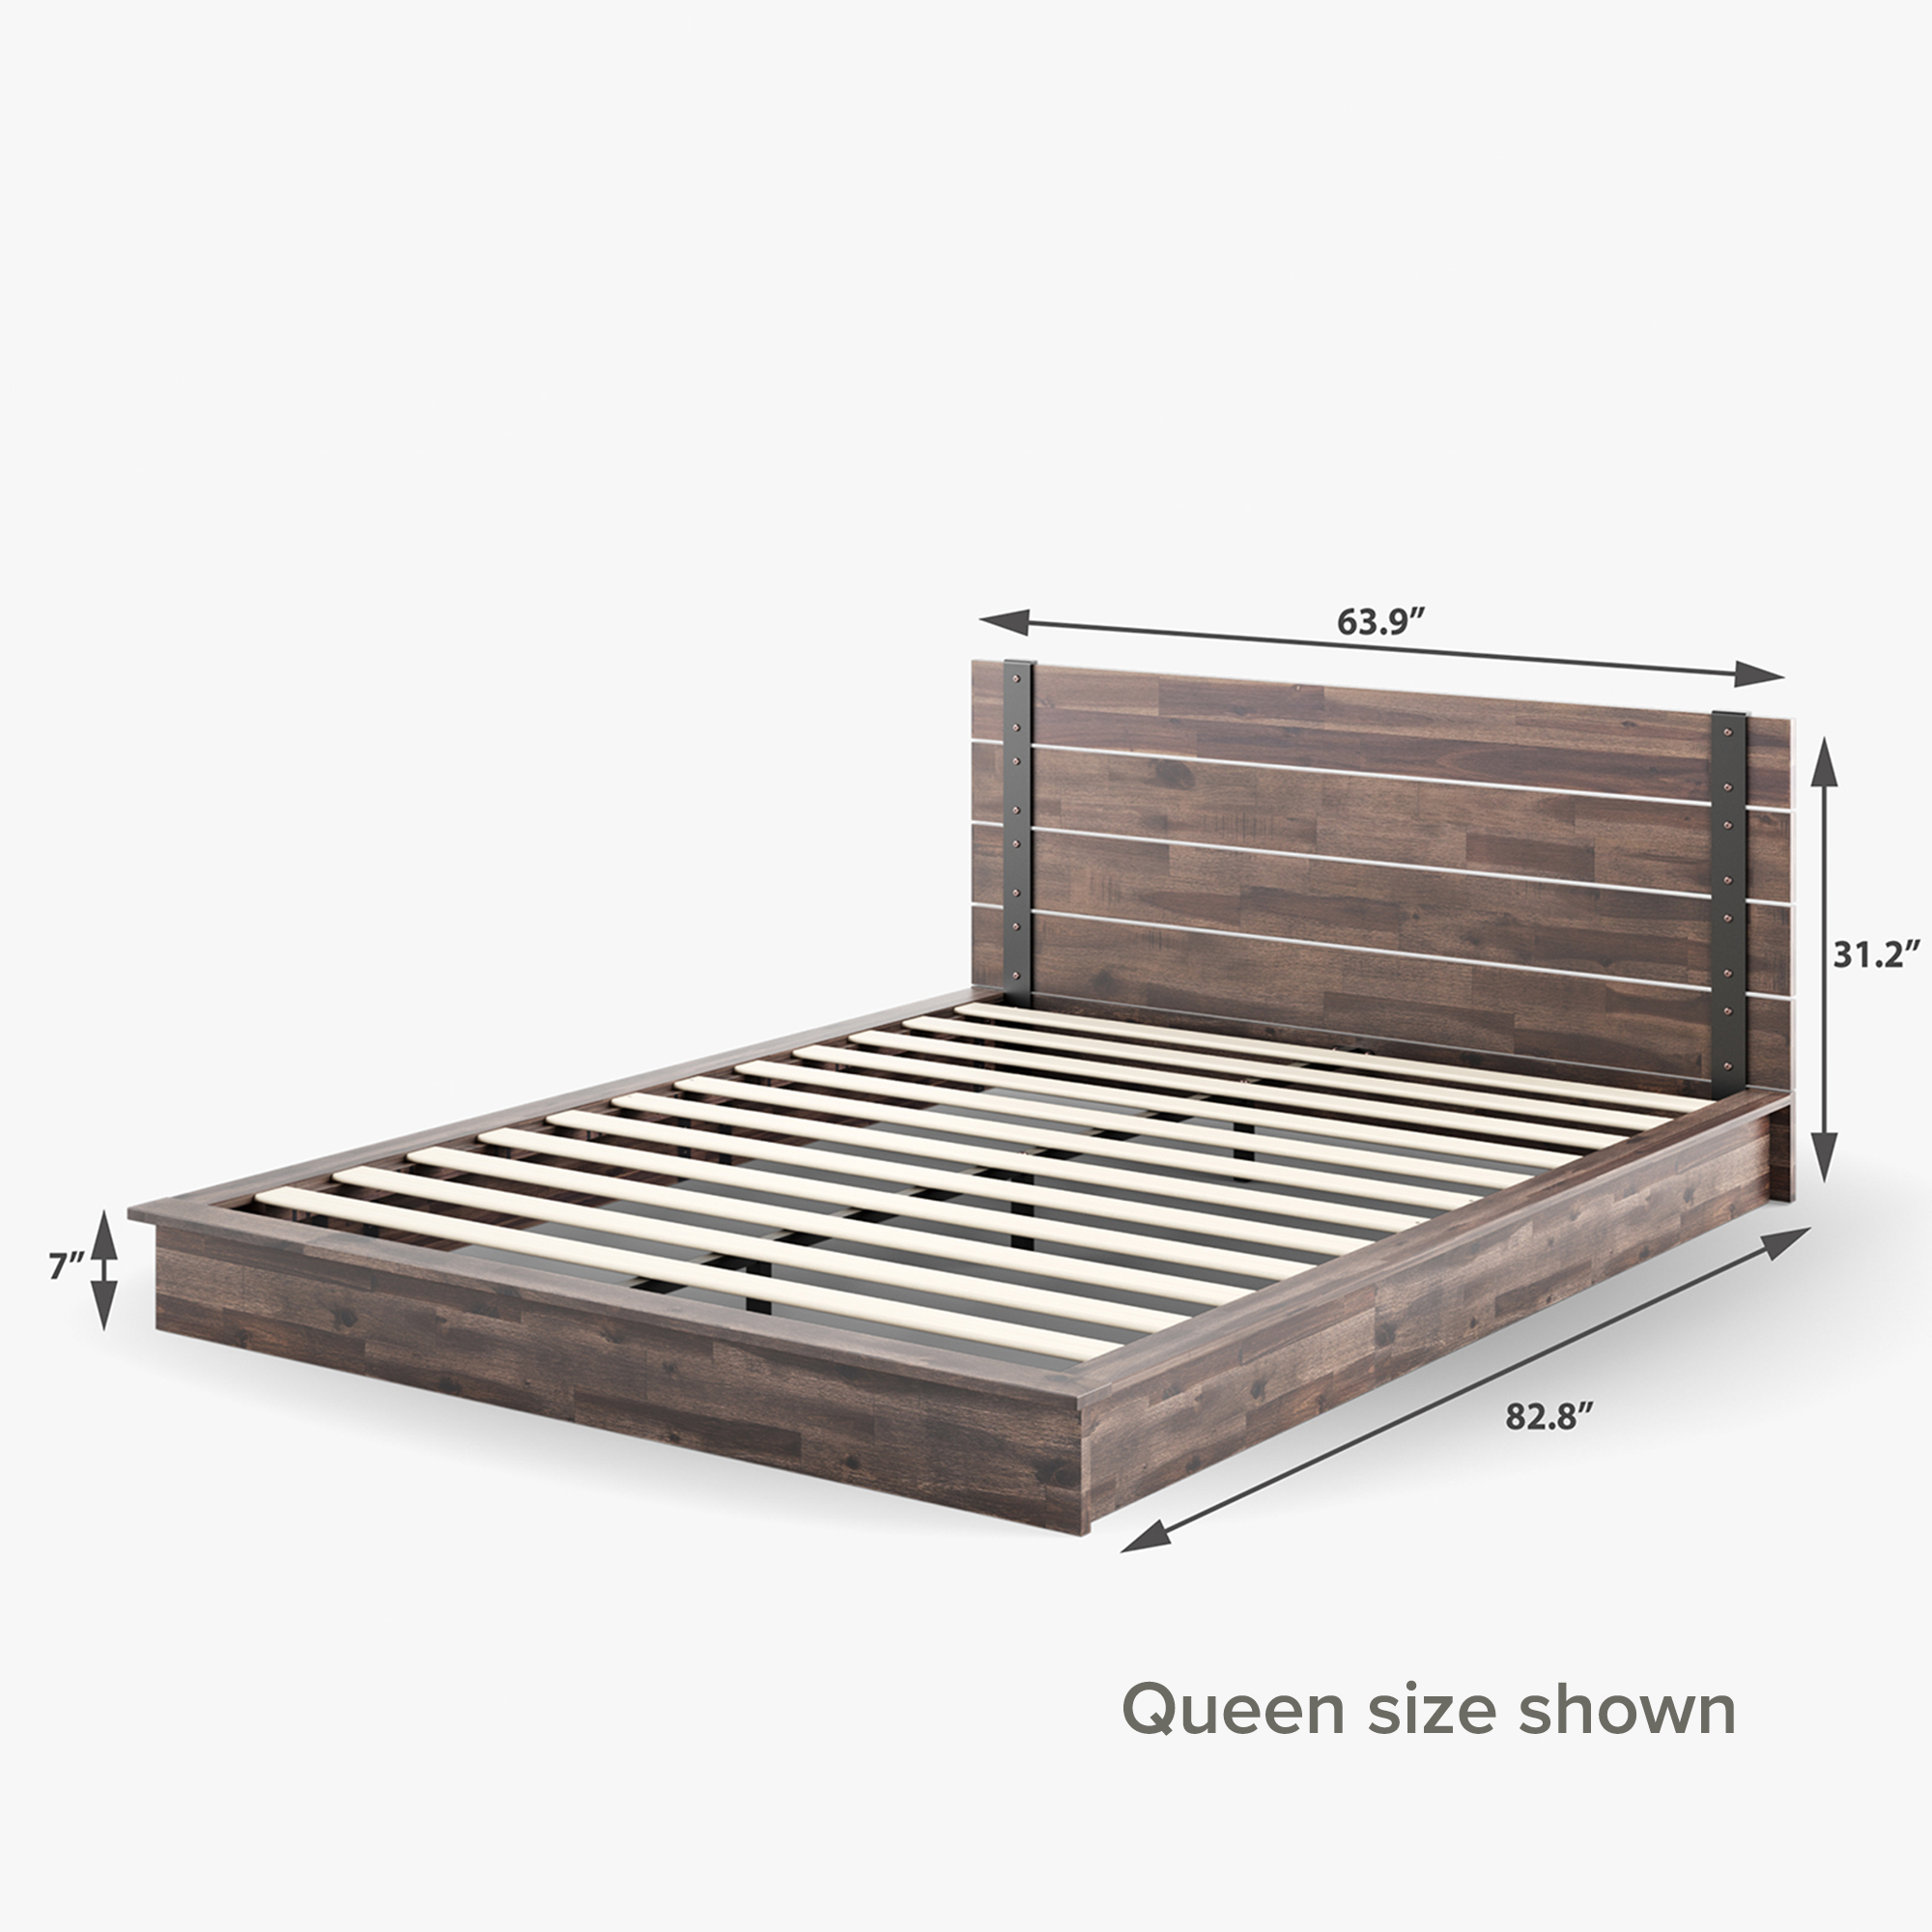 Brock Metal and Wood Platform Bed Frame queen size dimensions shown